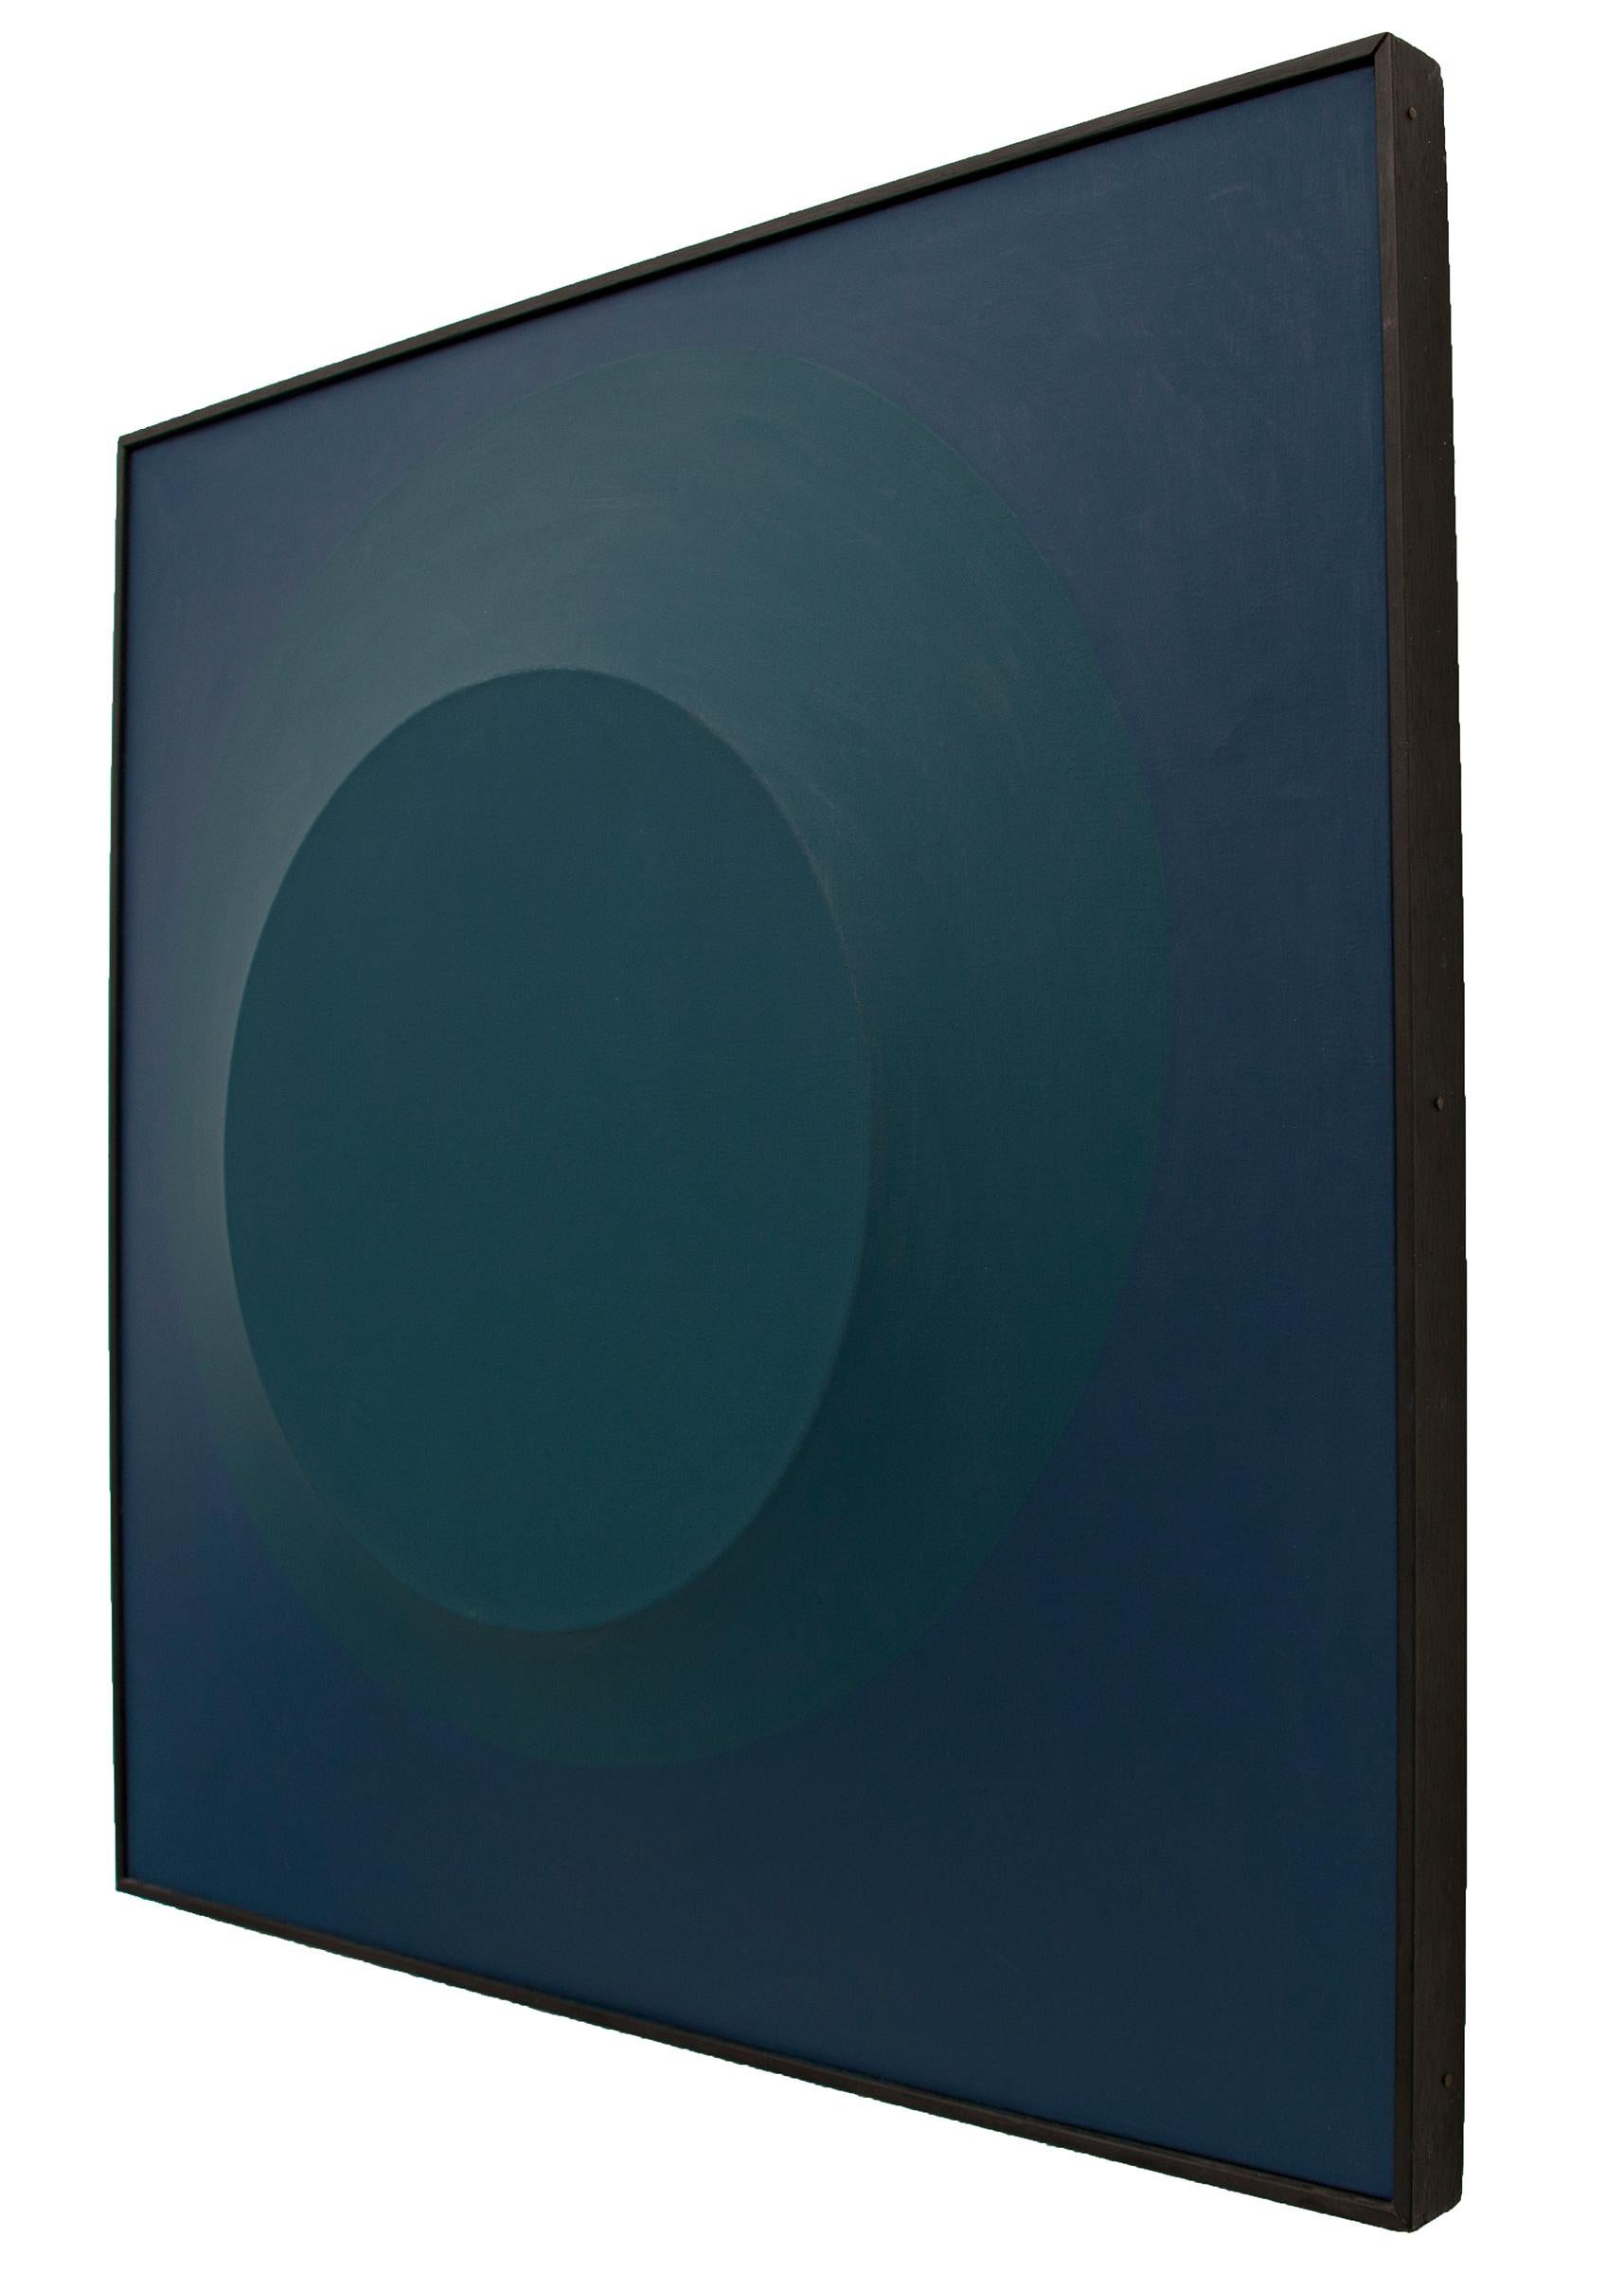 Blue On Blue #1, original vintage 1965 abstract painting by Denver artist, Angelo Di Benedetto (1913-1992).  Acrylic paint in shades of blue on shaped 3 dimensional (3D) canvas with a circular form protruding from the center of square painting. 